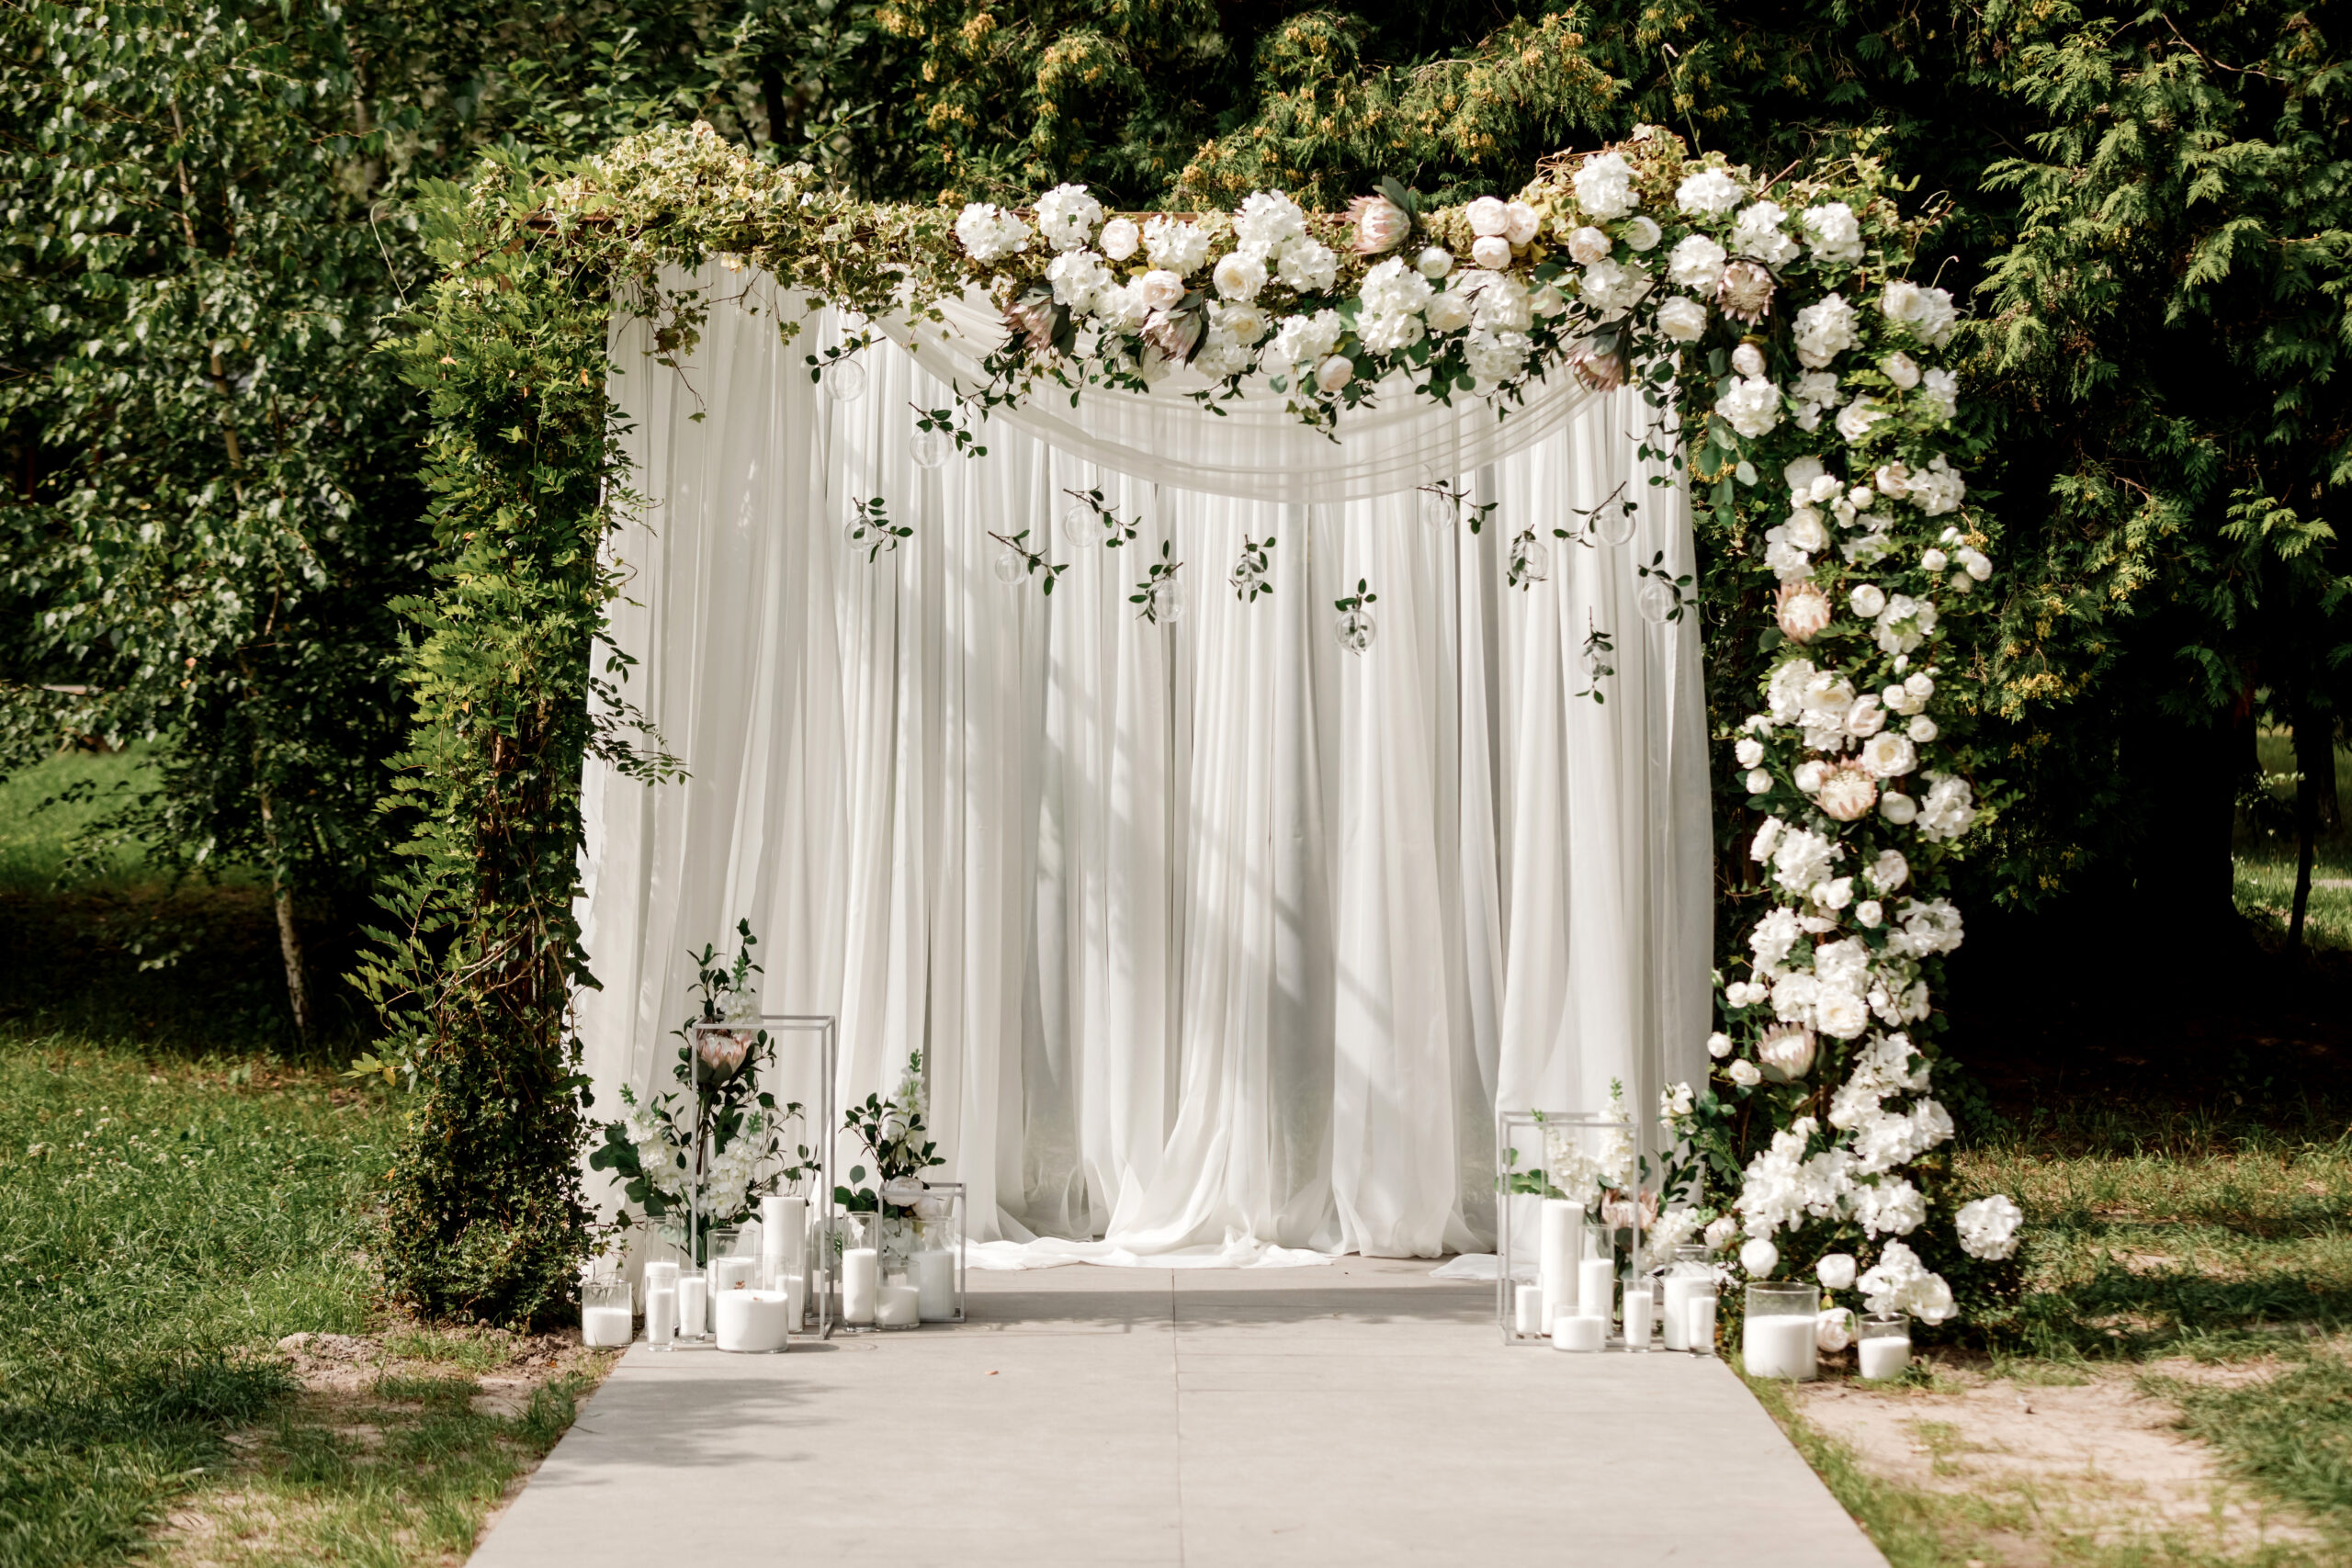 An outdoor wedding arch elegantly draped in white fabric and adorned with white flowers and greenery.